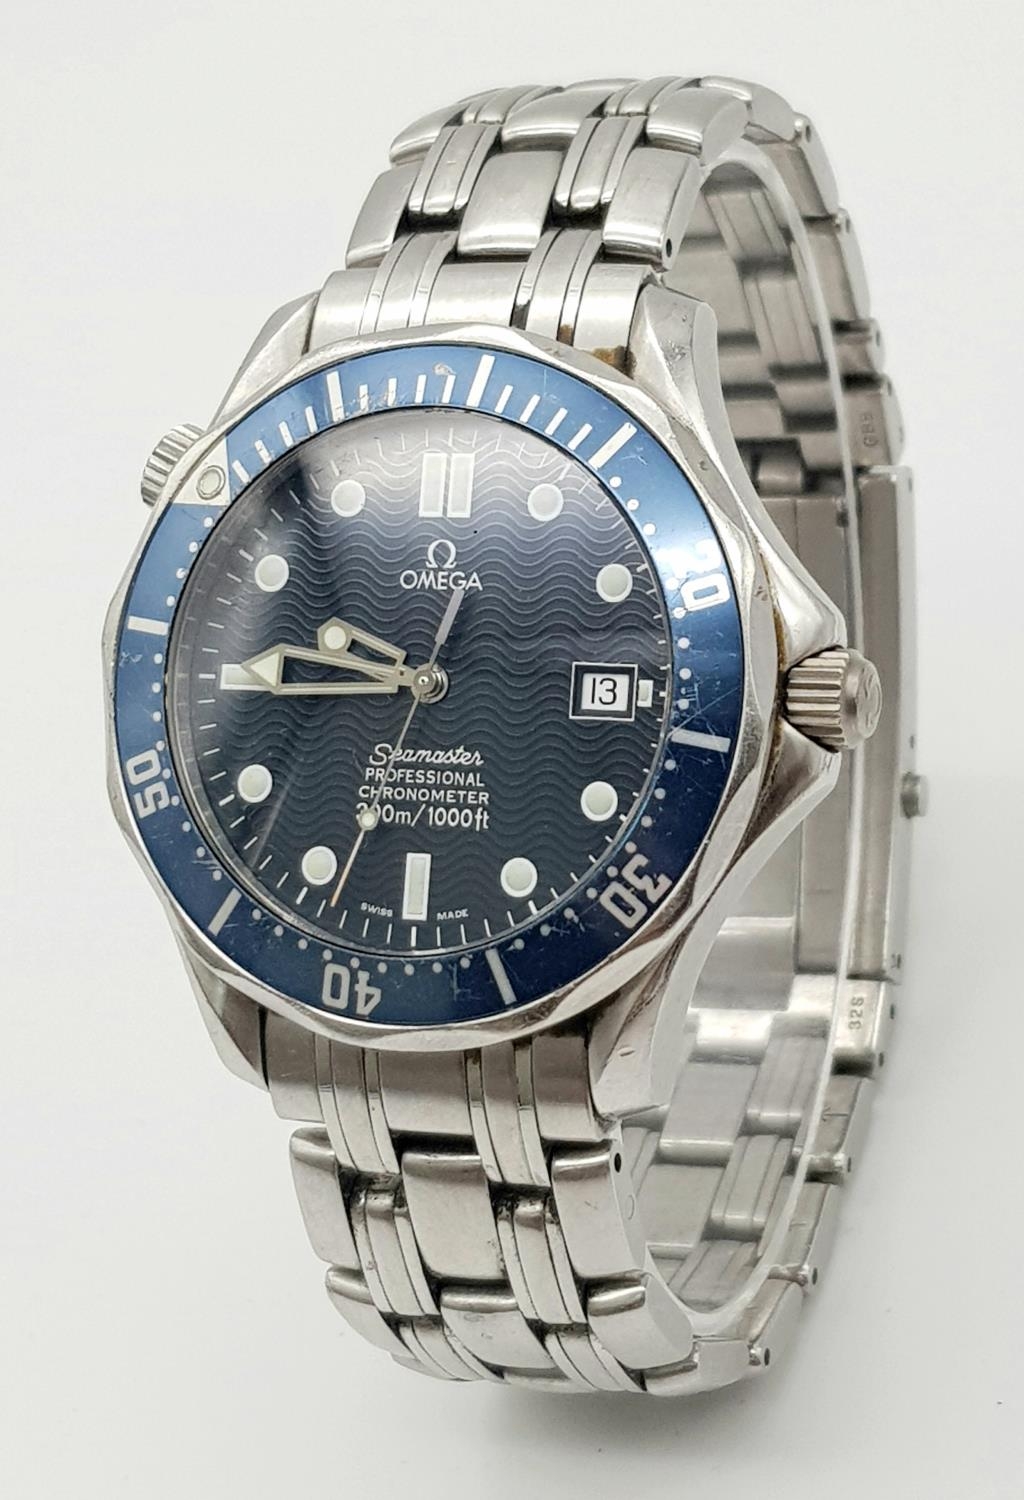 An Omega Seamaster Professional Automatic Gents Watch. Model 2532. Stainless steel bracelet and case